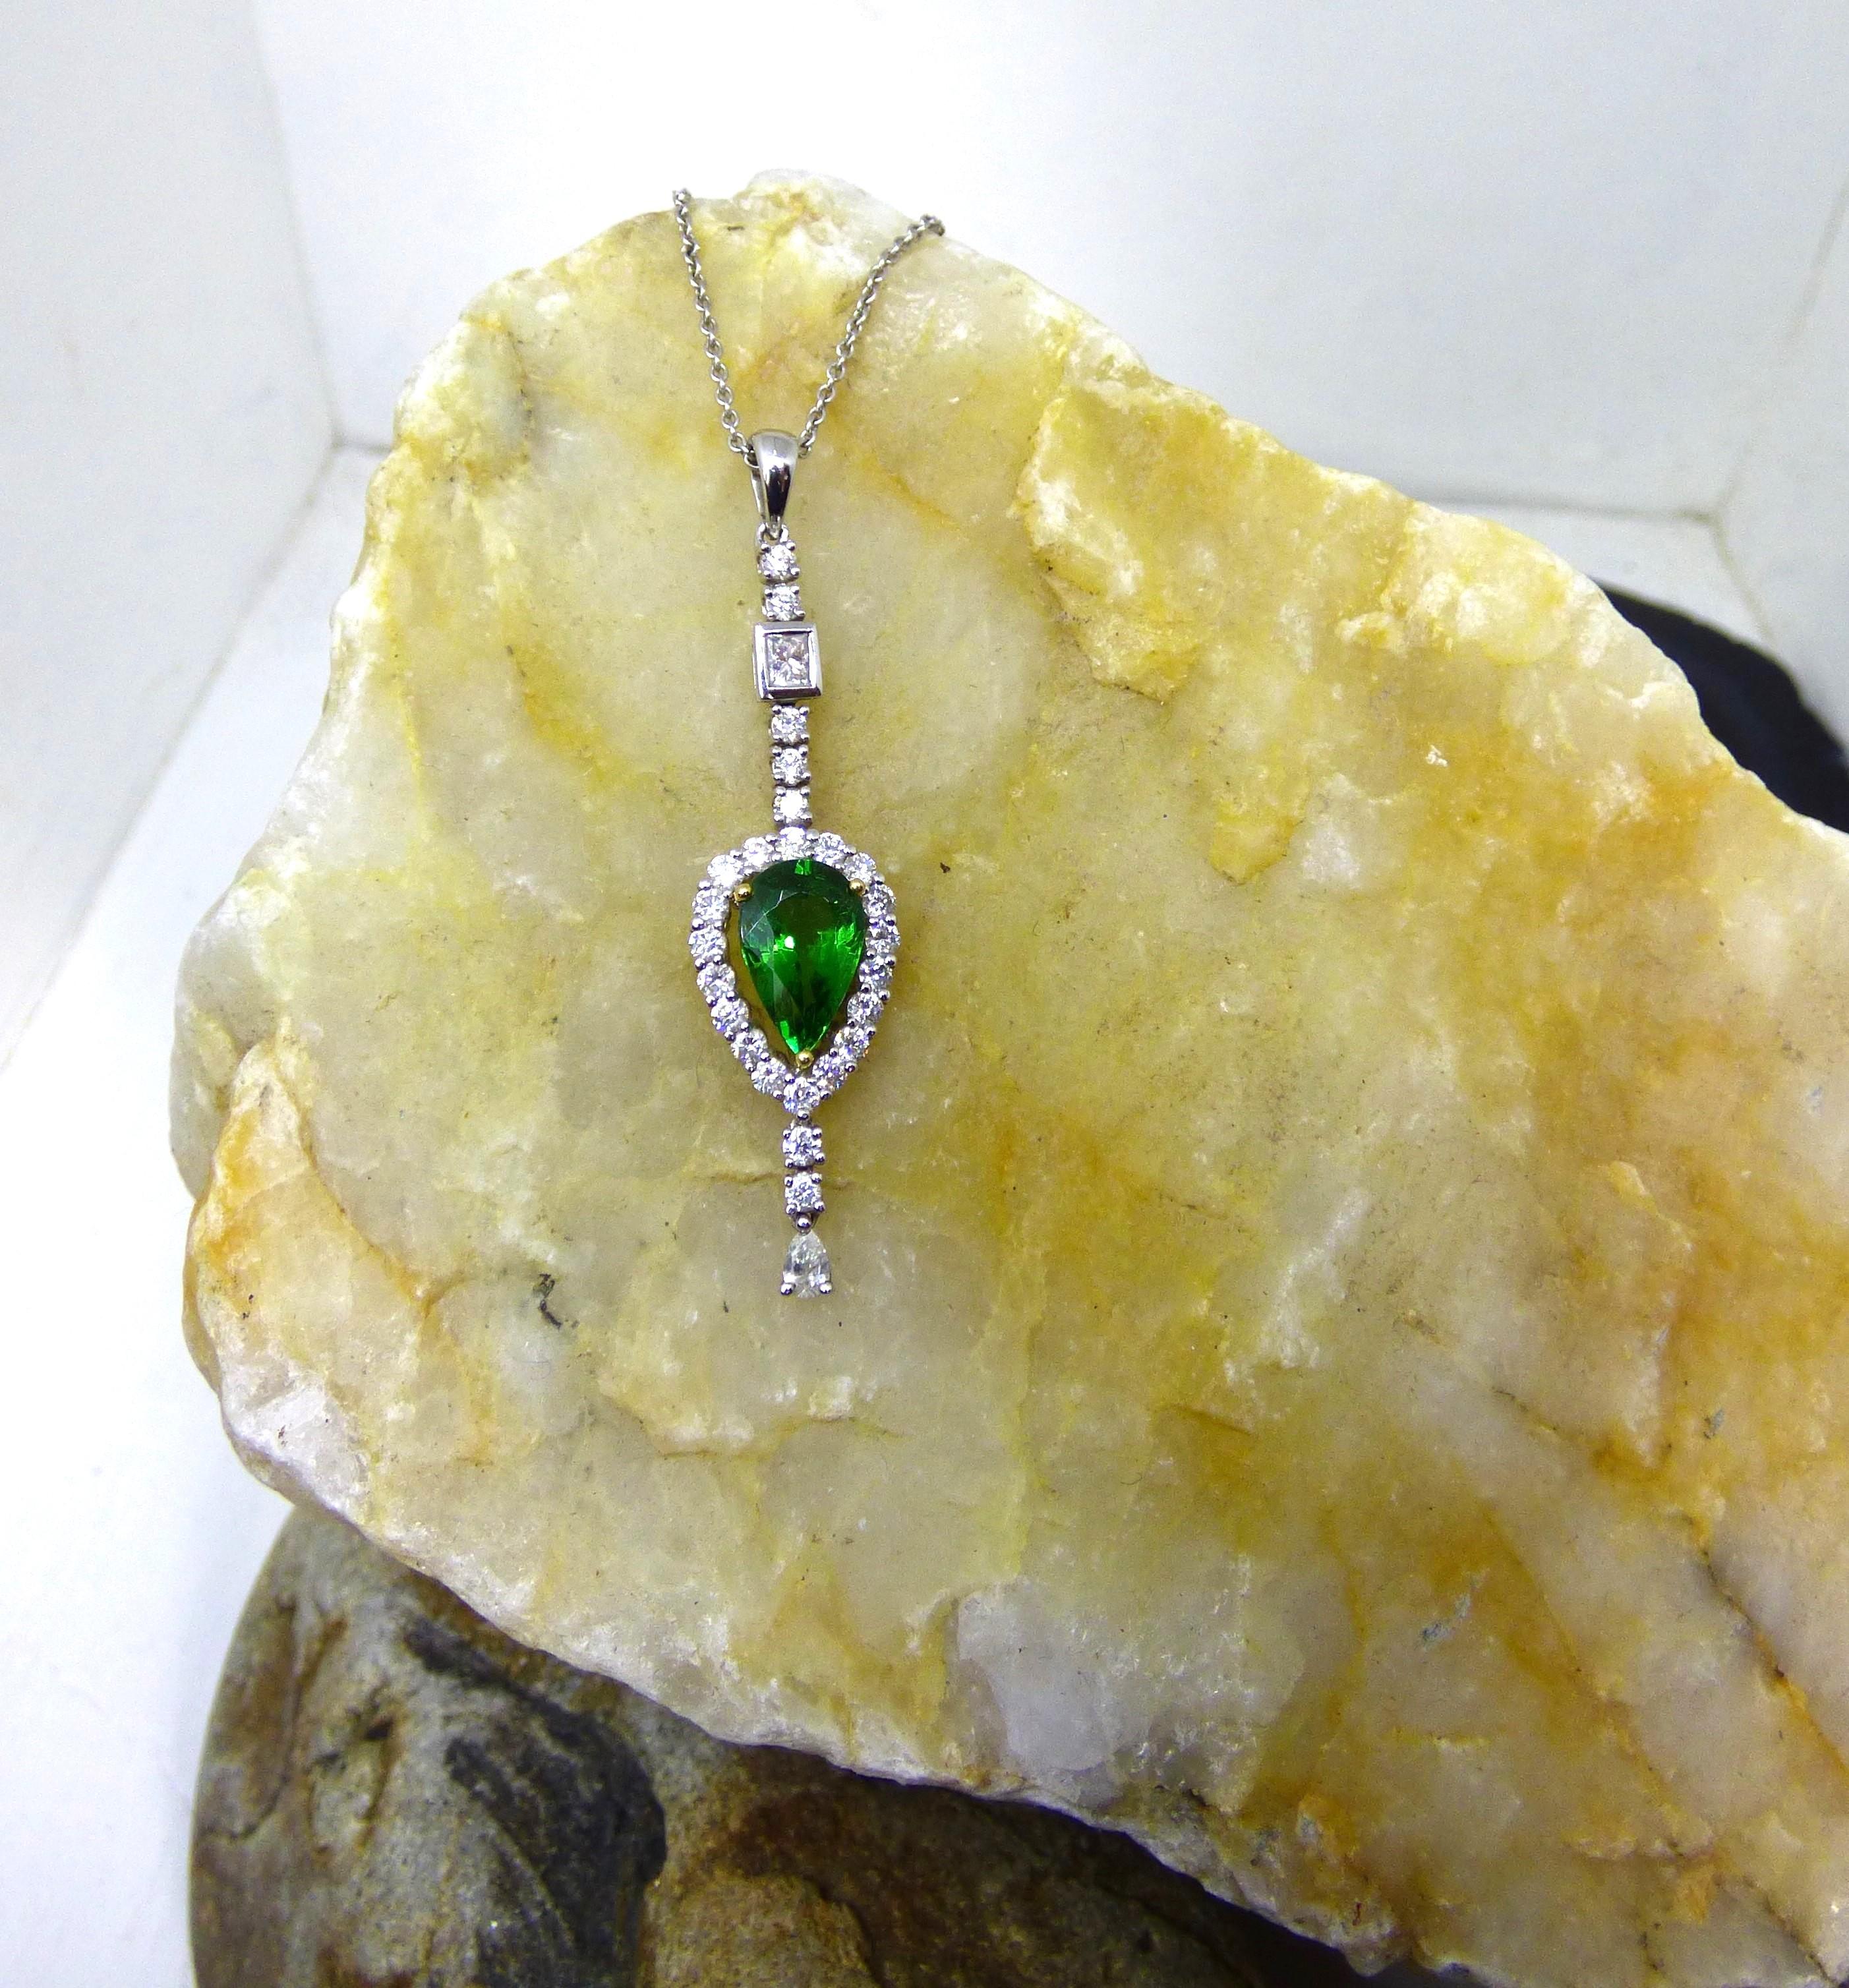 A bright green pear shaped Tsavorite Garnet is set with Diamonds in this dramatic pendant.  The Garnet is 12X7mm in size and weighs 2.24 ct.  It is set with 25 round Diamonds (.84ct.) one Princess Cut Diamond near the top (.12ct.) and a pear shaped